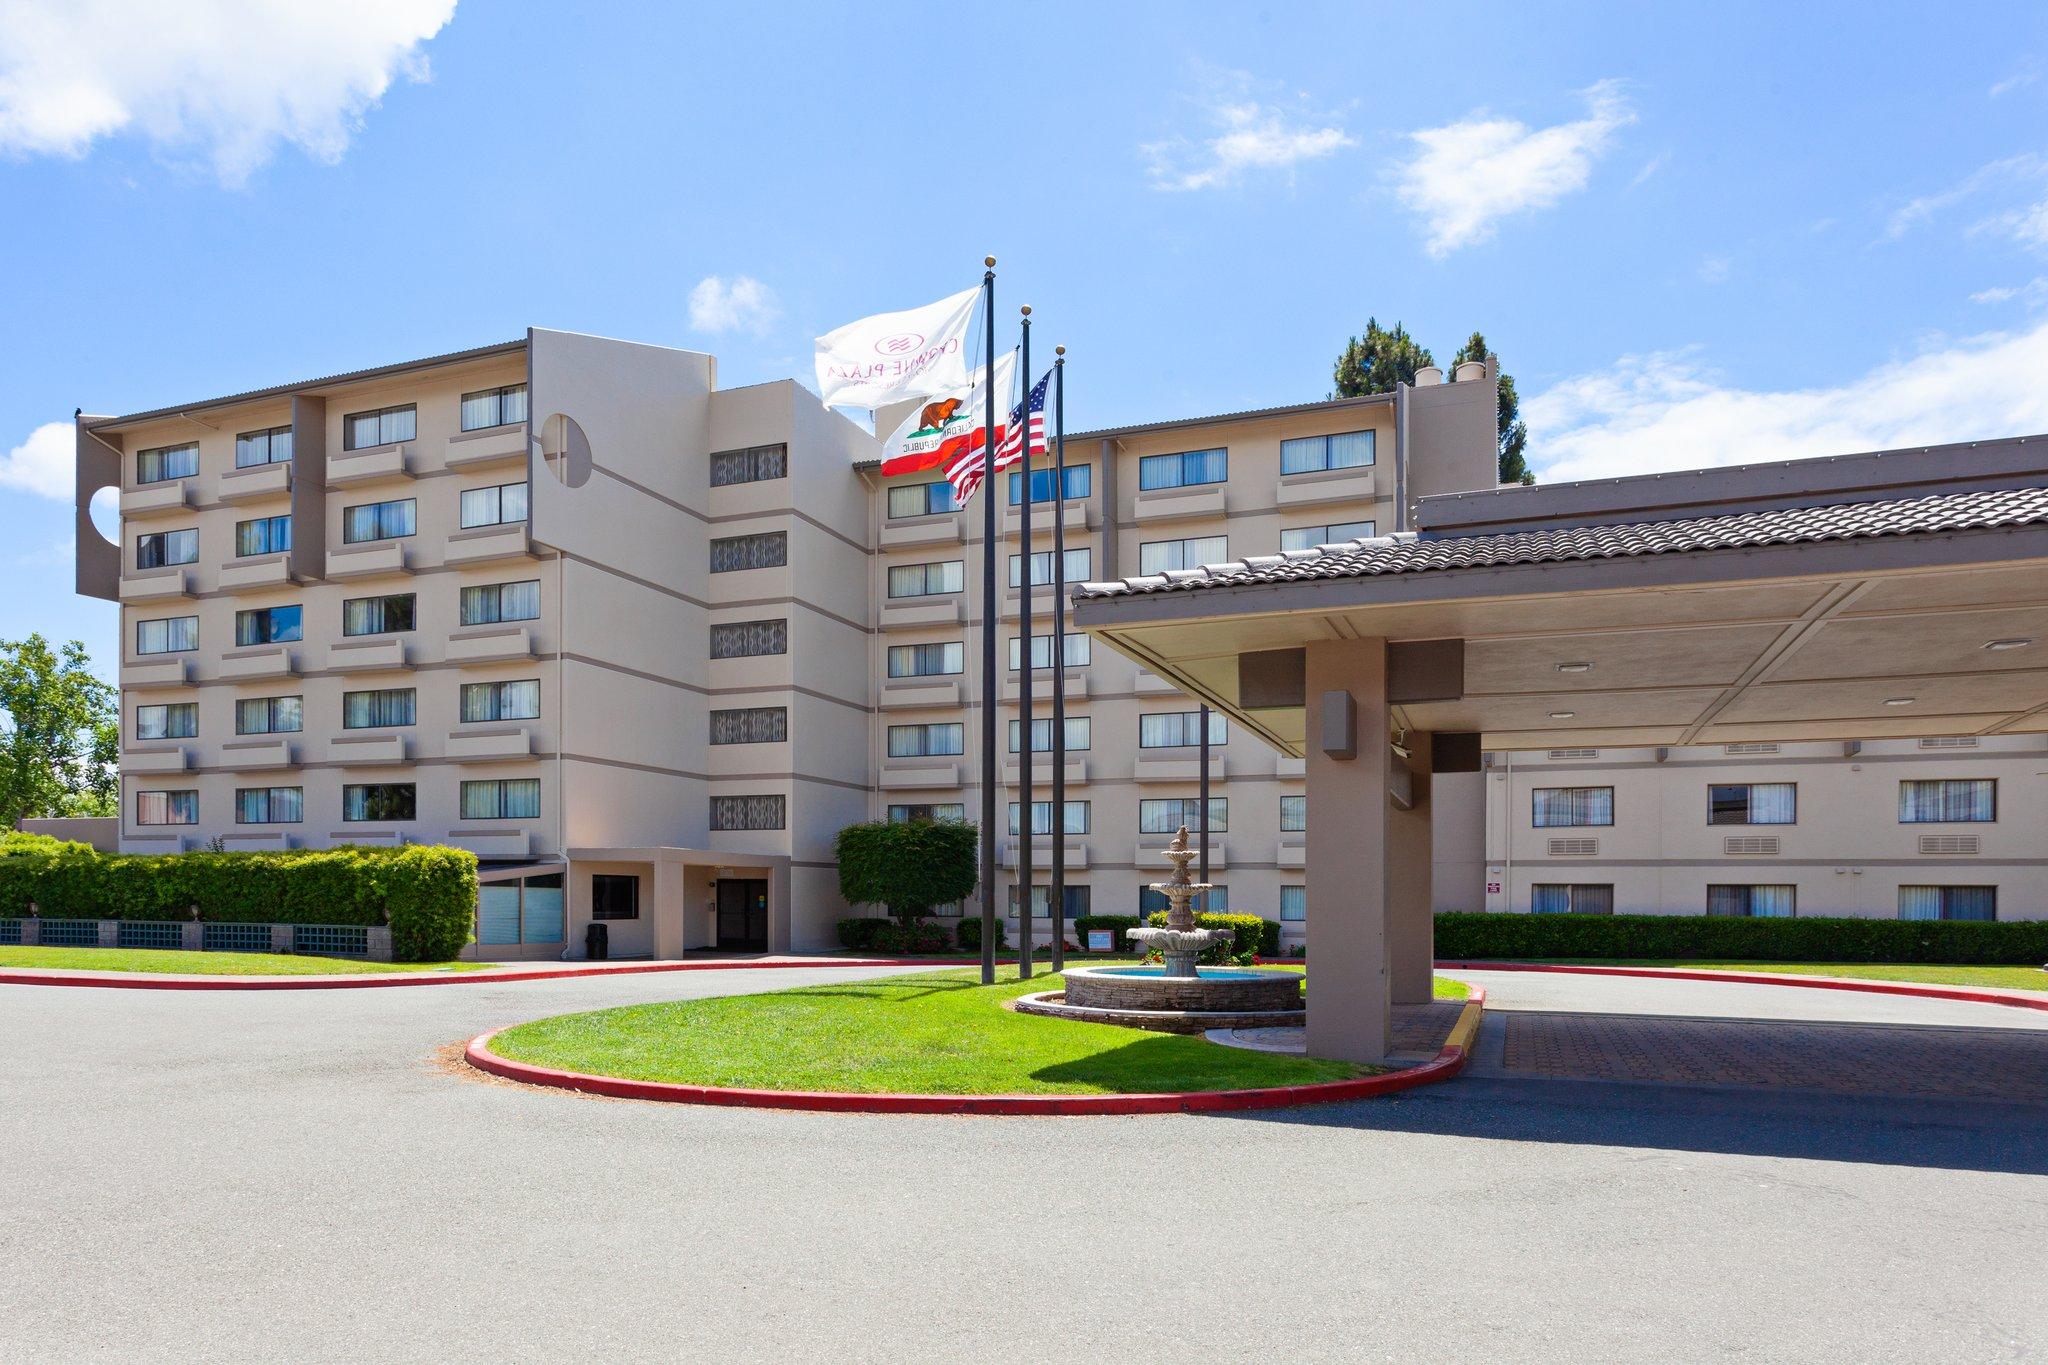 Crowne Plaza Silicon Valley N - Union City in Union City, CA